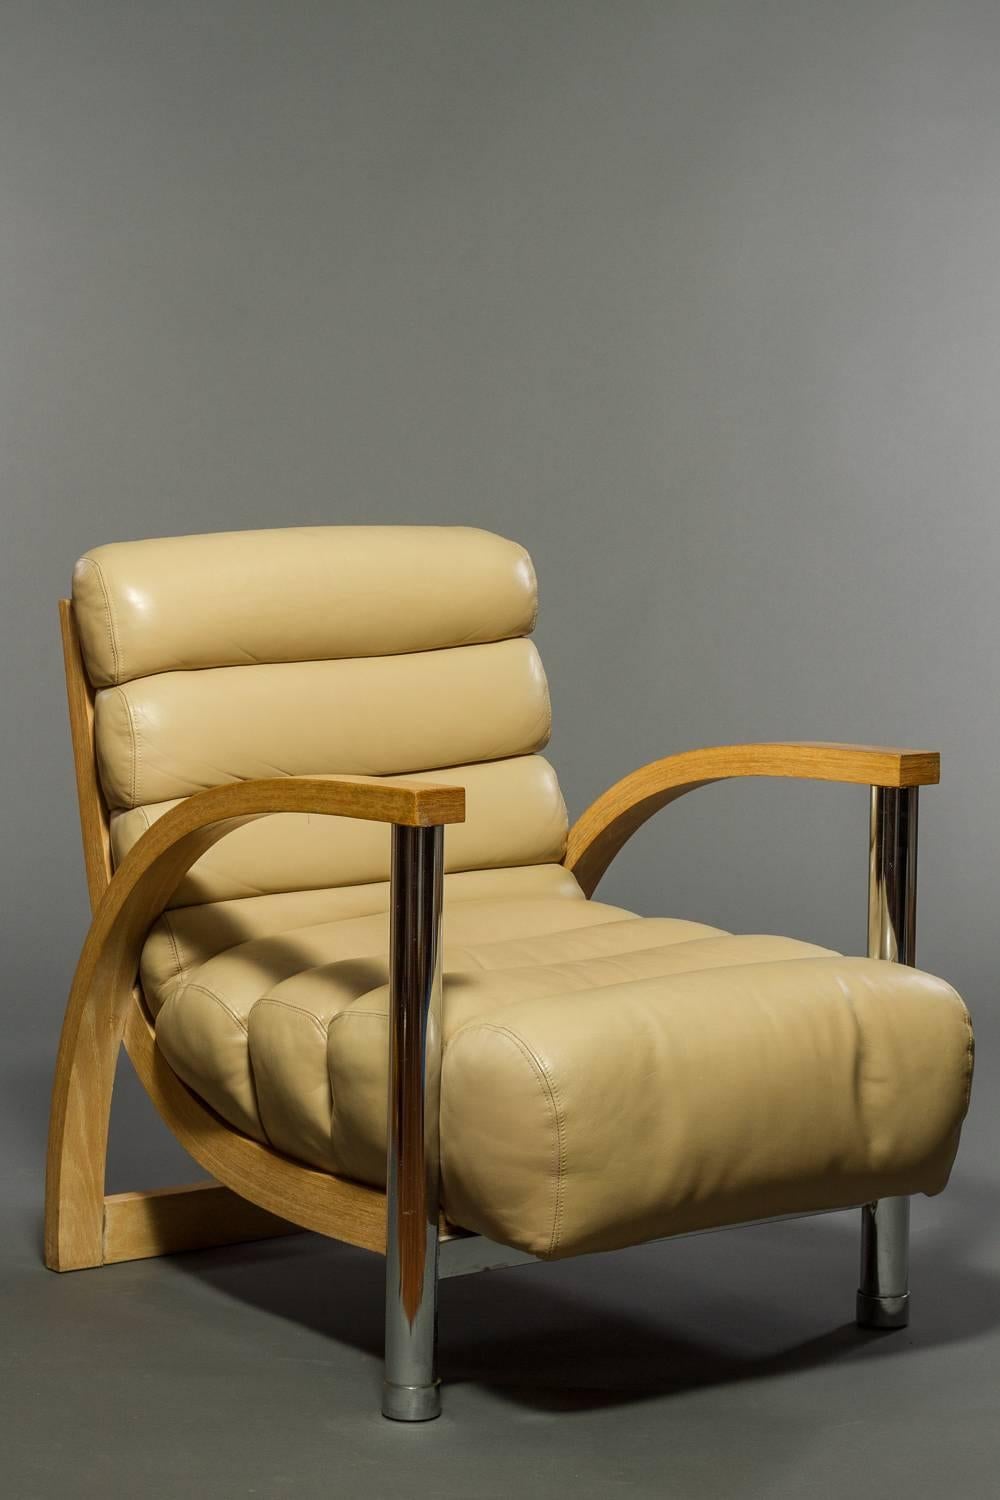 Very comfortable club chair by designer Jay Spectre.  Featuring original channeled leather cushion back and seat with crushed oak and tubular chrome frame. 